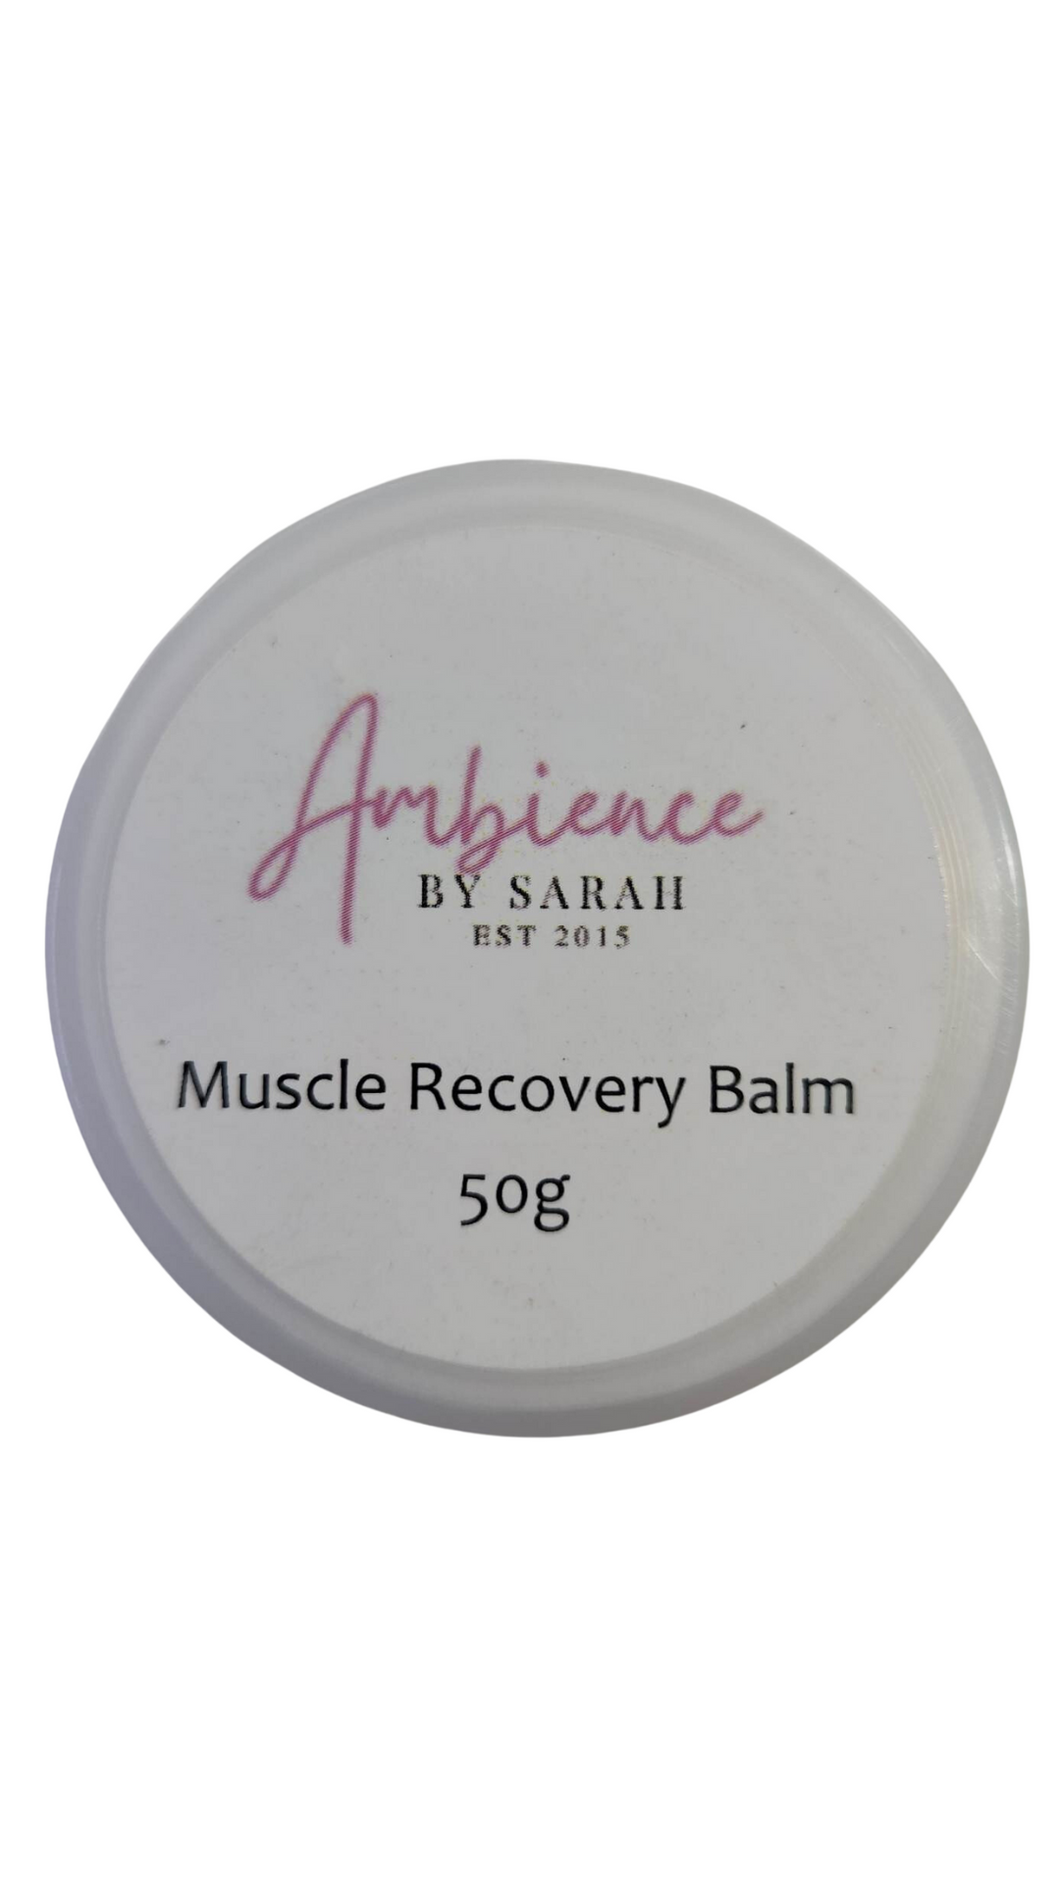 Muscle Recovery Balm